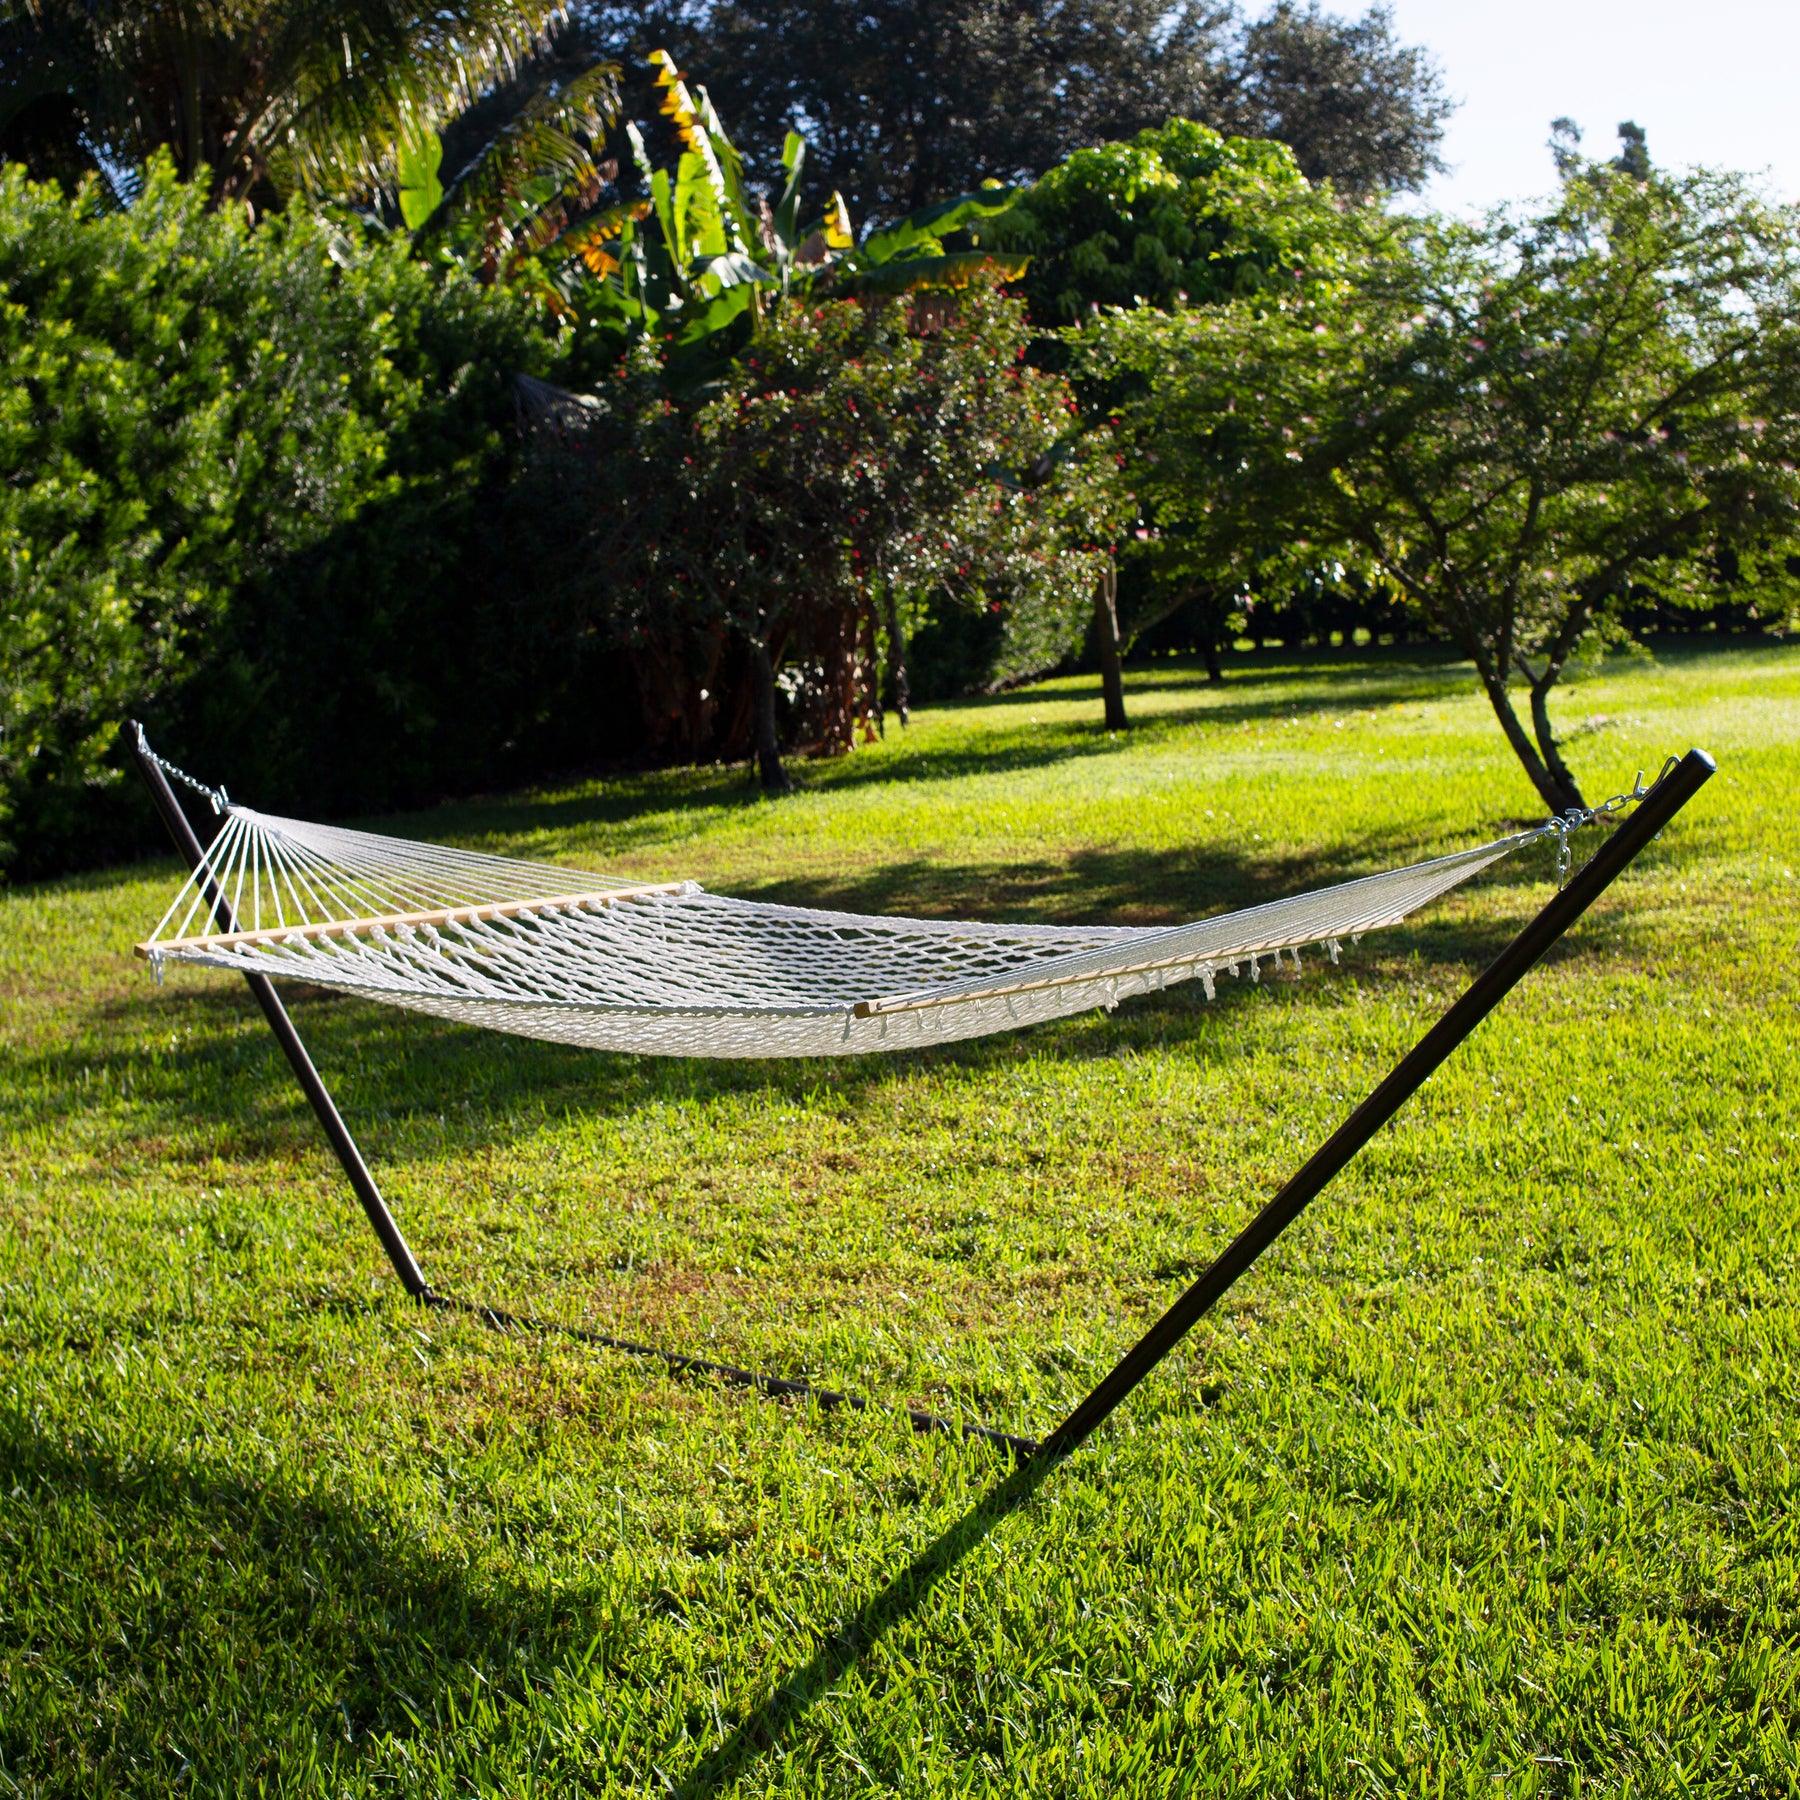 White variation of Bliss Hammocks 60-inch Wide Cotton Rope Hammock hooked up to a stand outside in the grass.